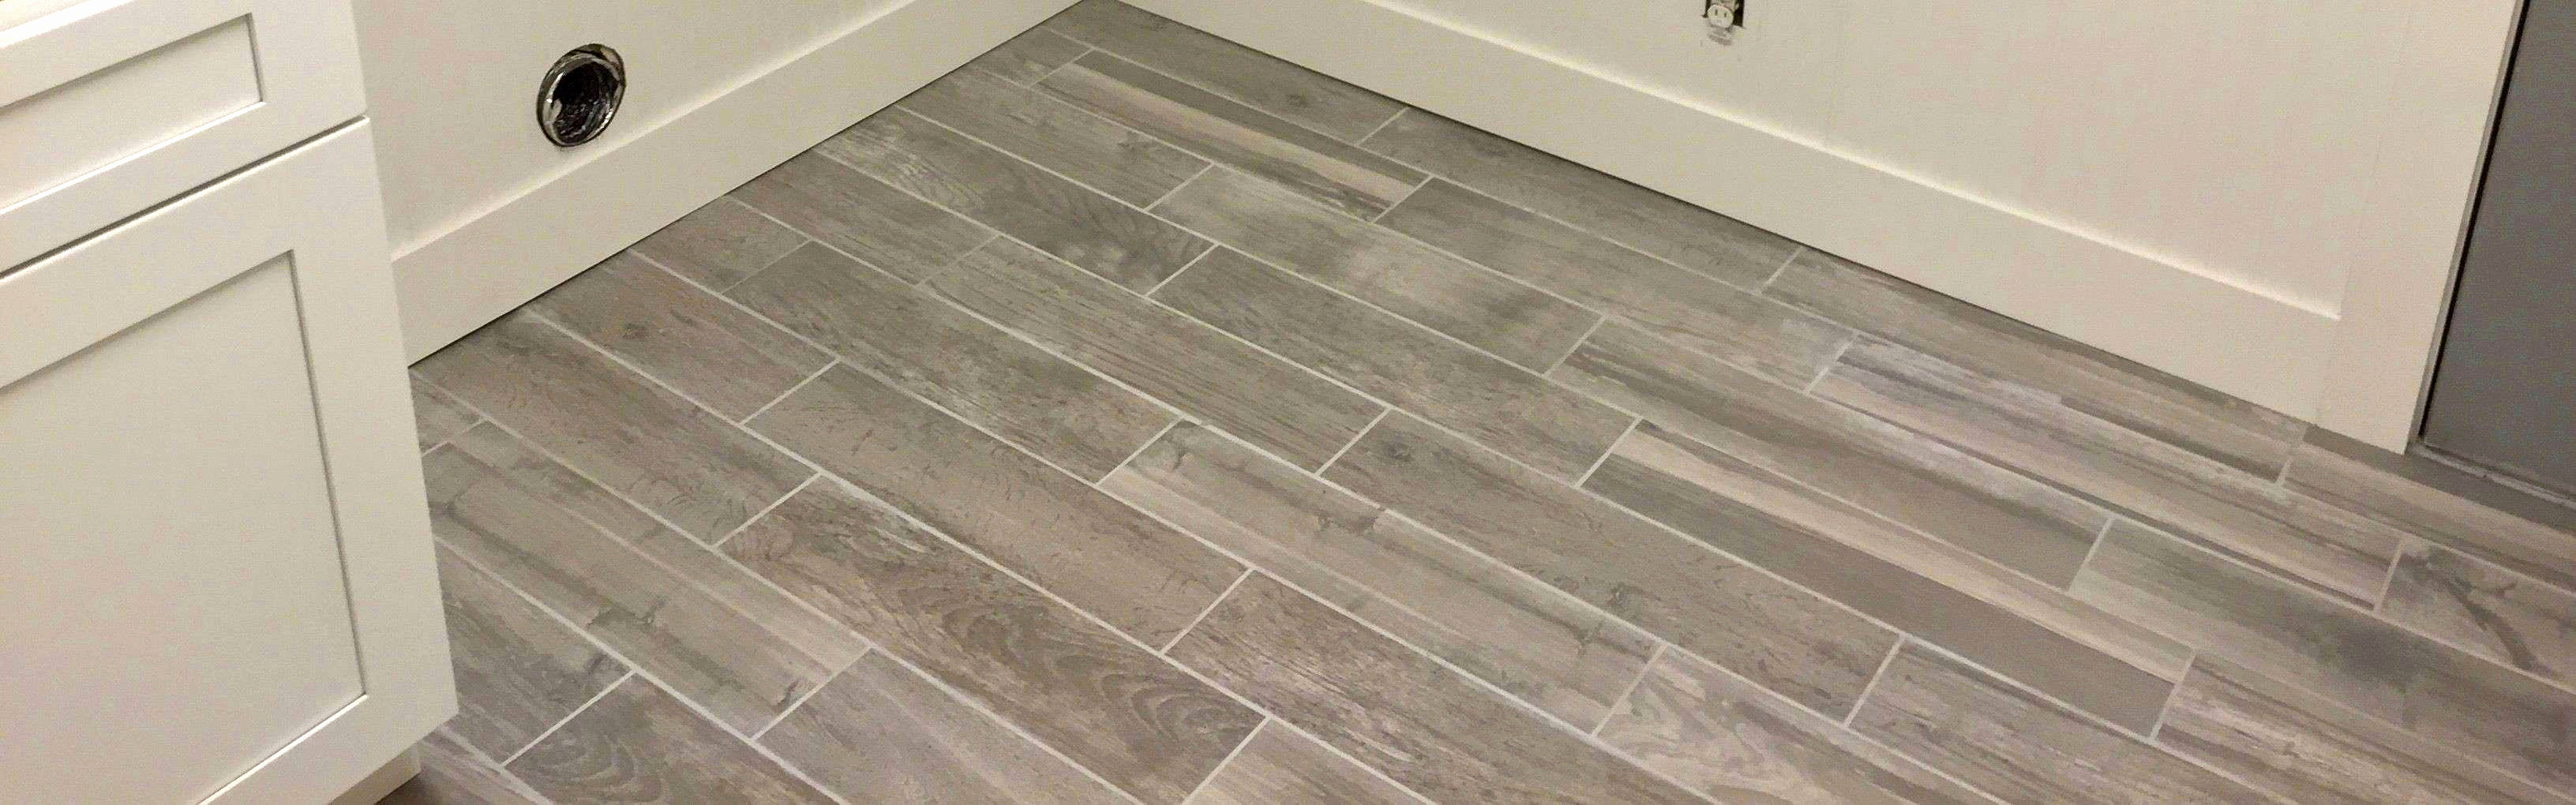 11 Recommended Layout for Hardwood Floor Install 2024 free download layout for hardwood floor install of carpet contractors ppt template business refrence calendar regarding unique bathroom tiling ideas best h sink install bathroom i 0d exciting beautiful fr